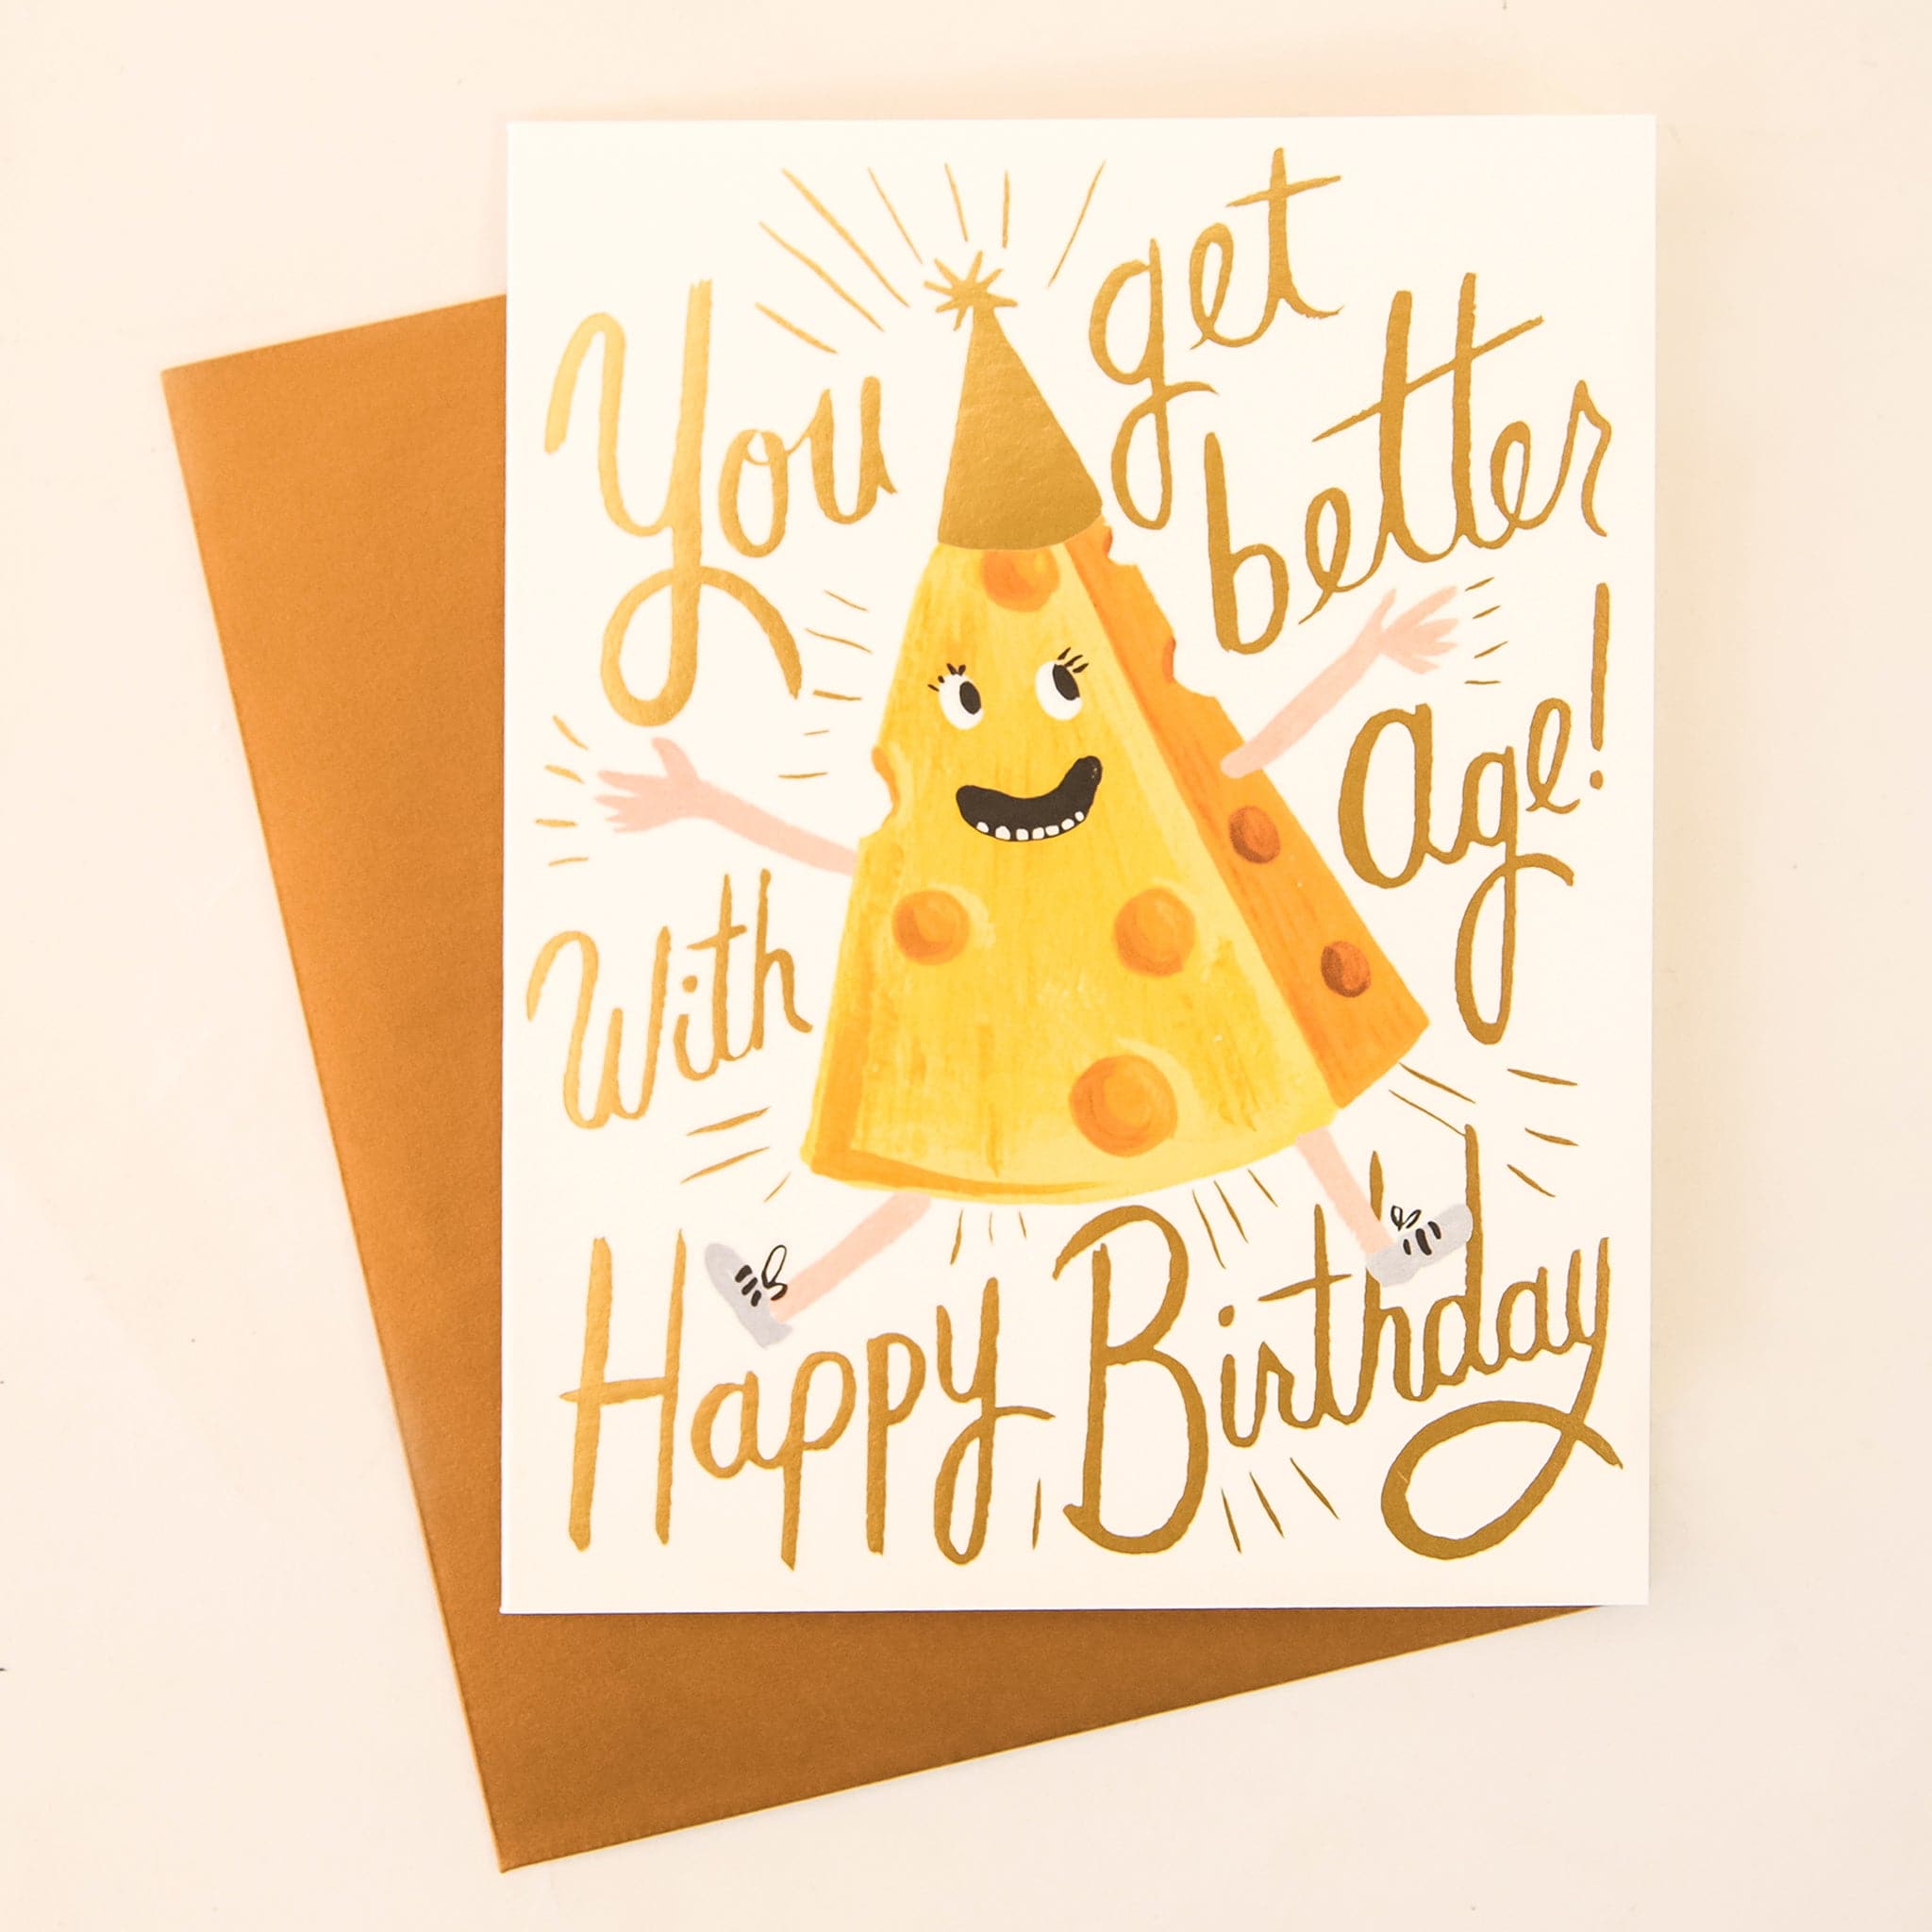 A white card with a yellow slice of cheese with a smiling face and birthday hat along with cursive writing that reads, "You get better with age! Happy Birthday".